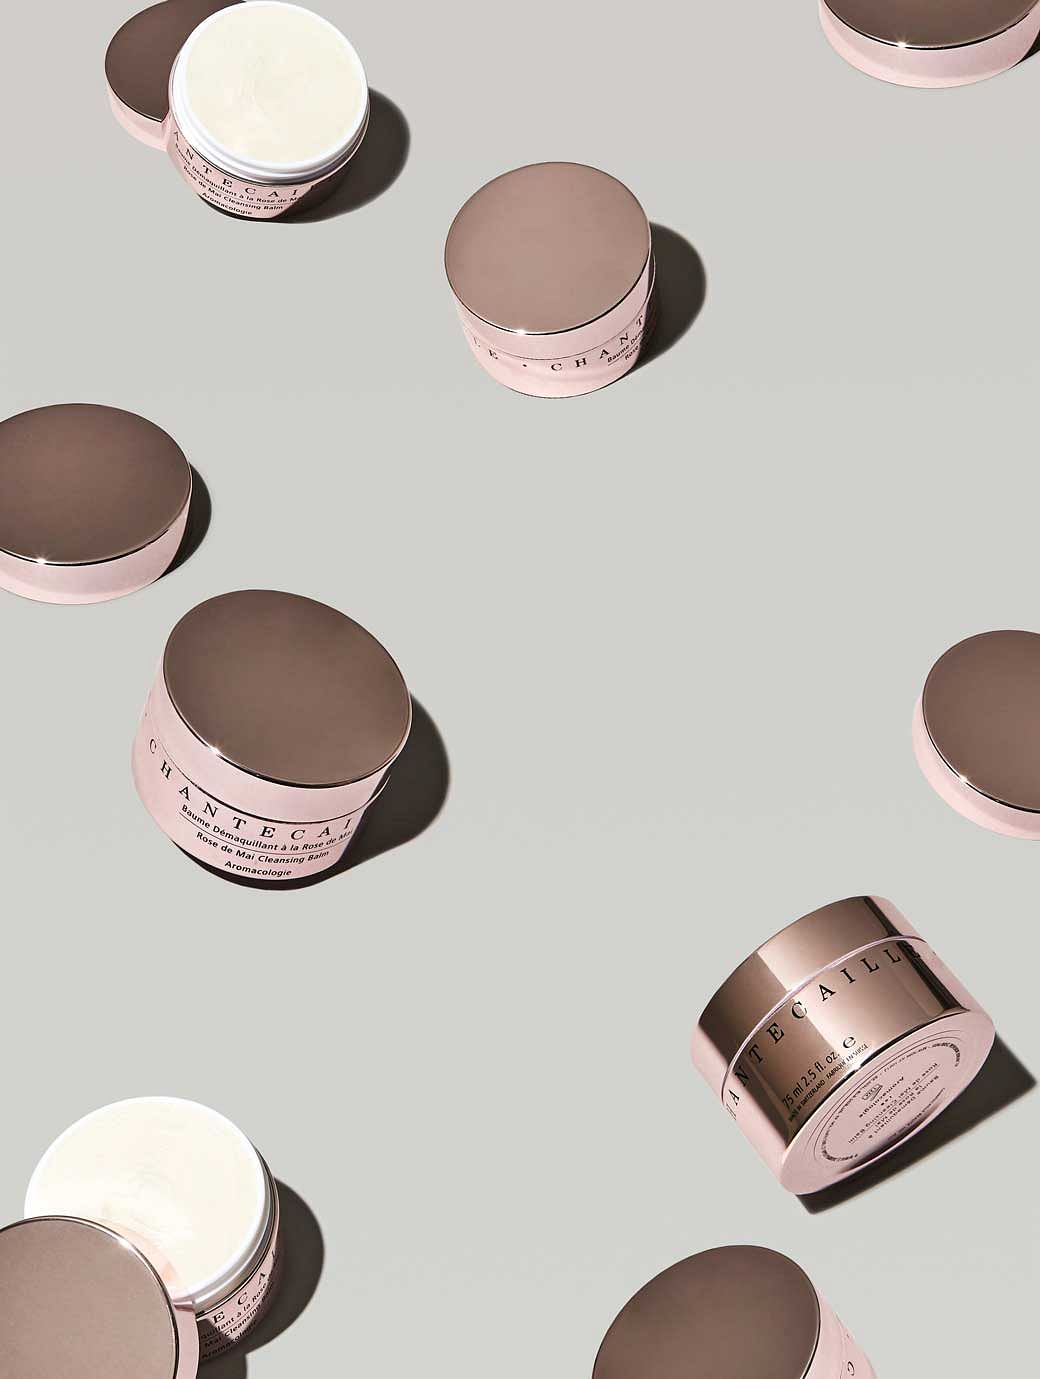 Chantecaille’s Triple-duty Cleansing Balm